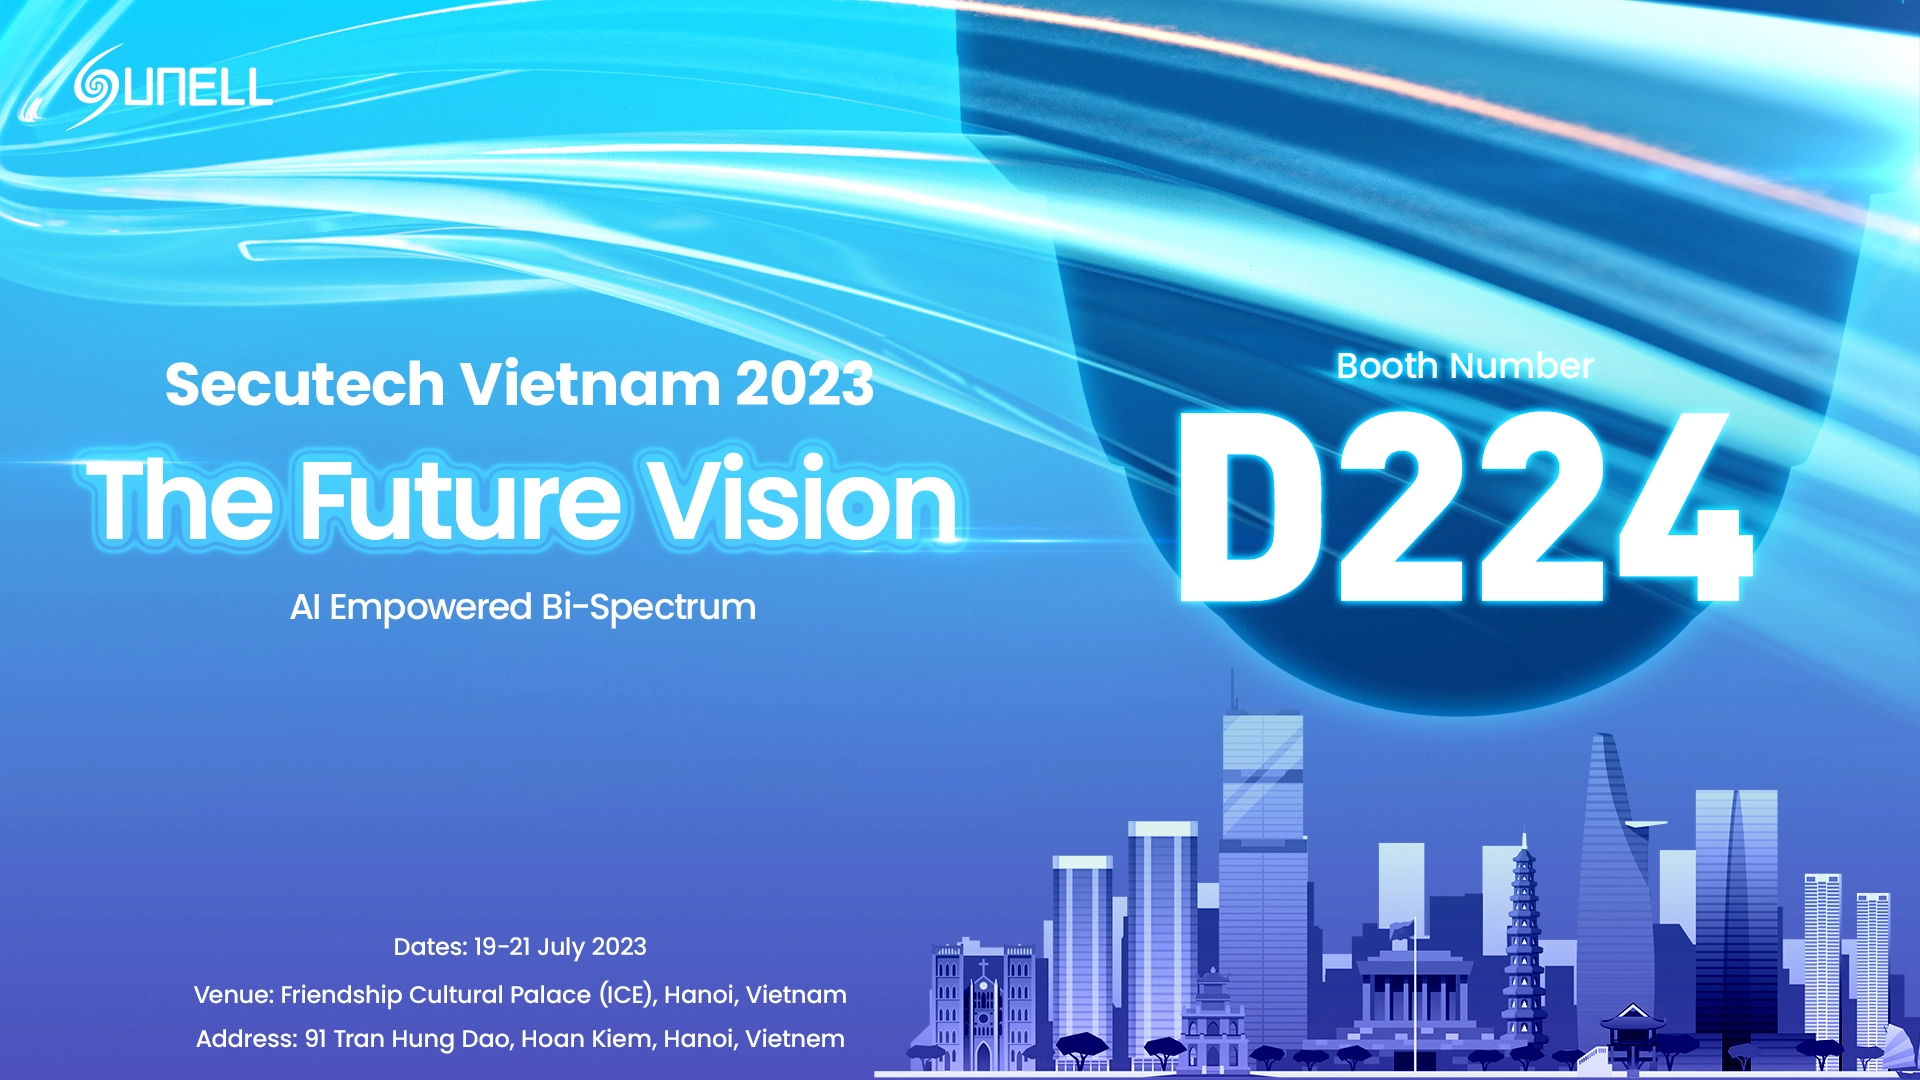 Sunell will Showcase New Products at The Secutech Vietnam 2023 Exhibition